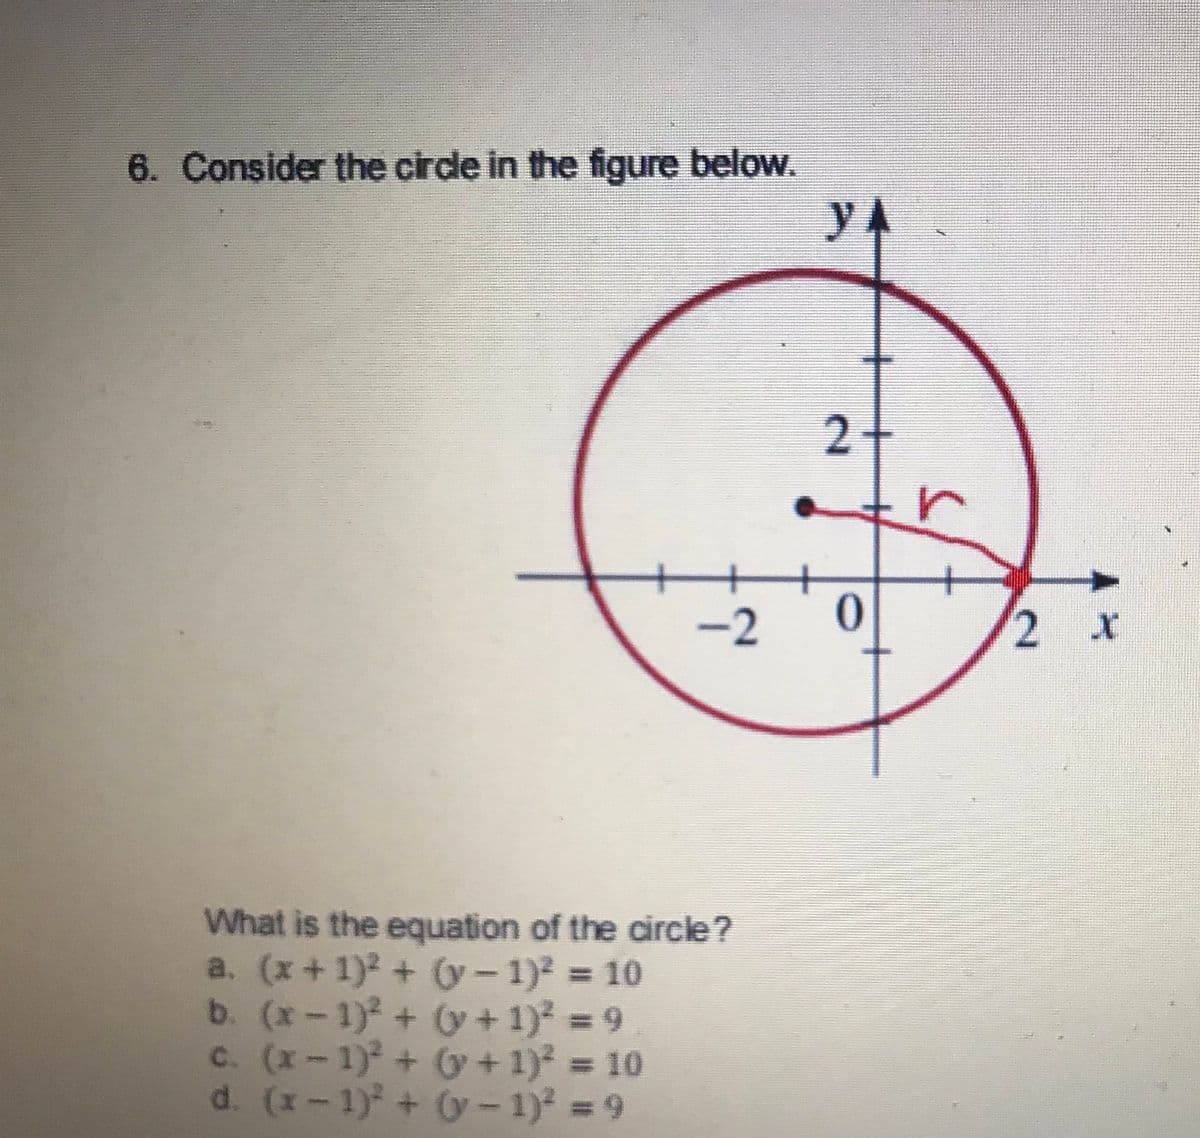 6. Consider the circle in the figure below.
-2
What is the equation of the circle?
a. (x + 1)² + (-1)² = 10
b. (x-1)² + (y + 1)² = 9
c. (x-1)² + (y + 1)² = 10
d. (x-1)² + (y− 1)² = 9
YA
2
0
2 x